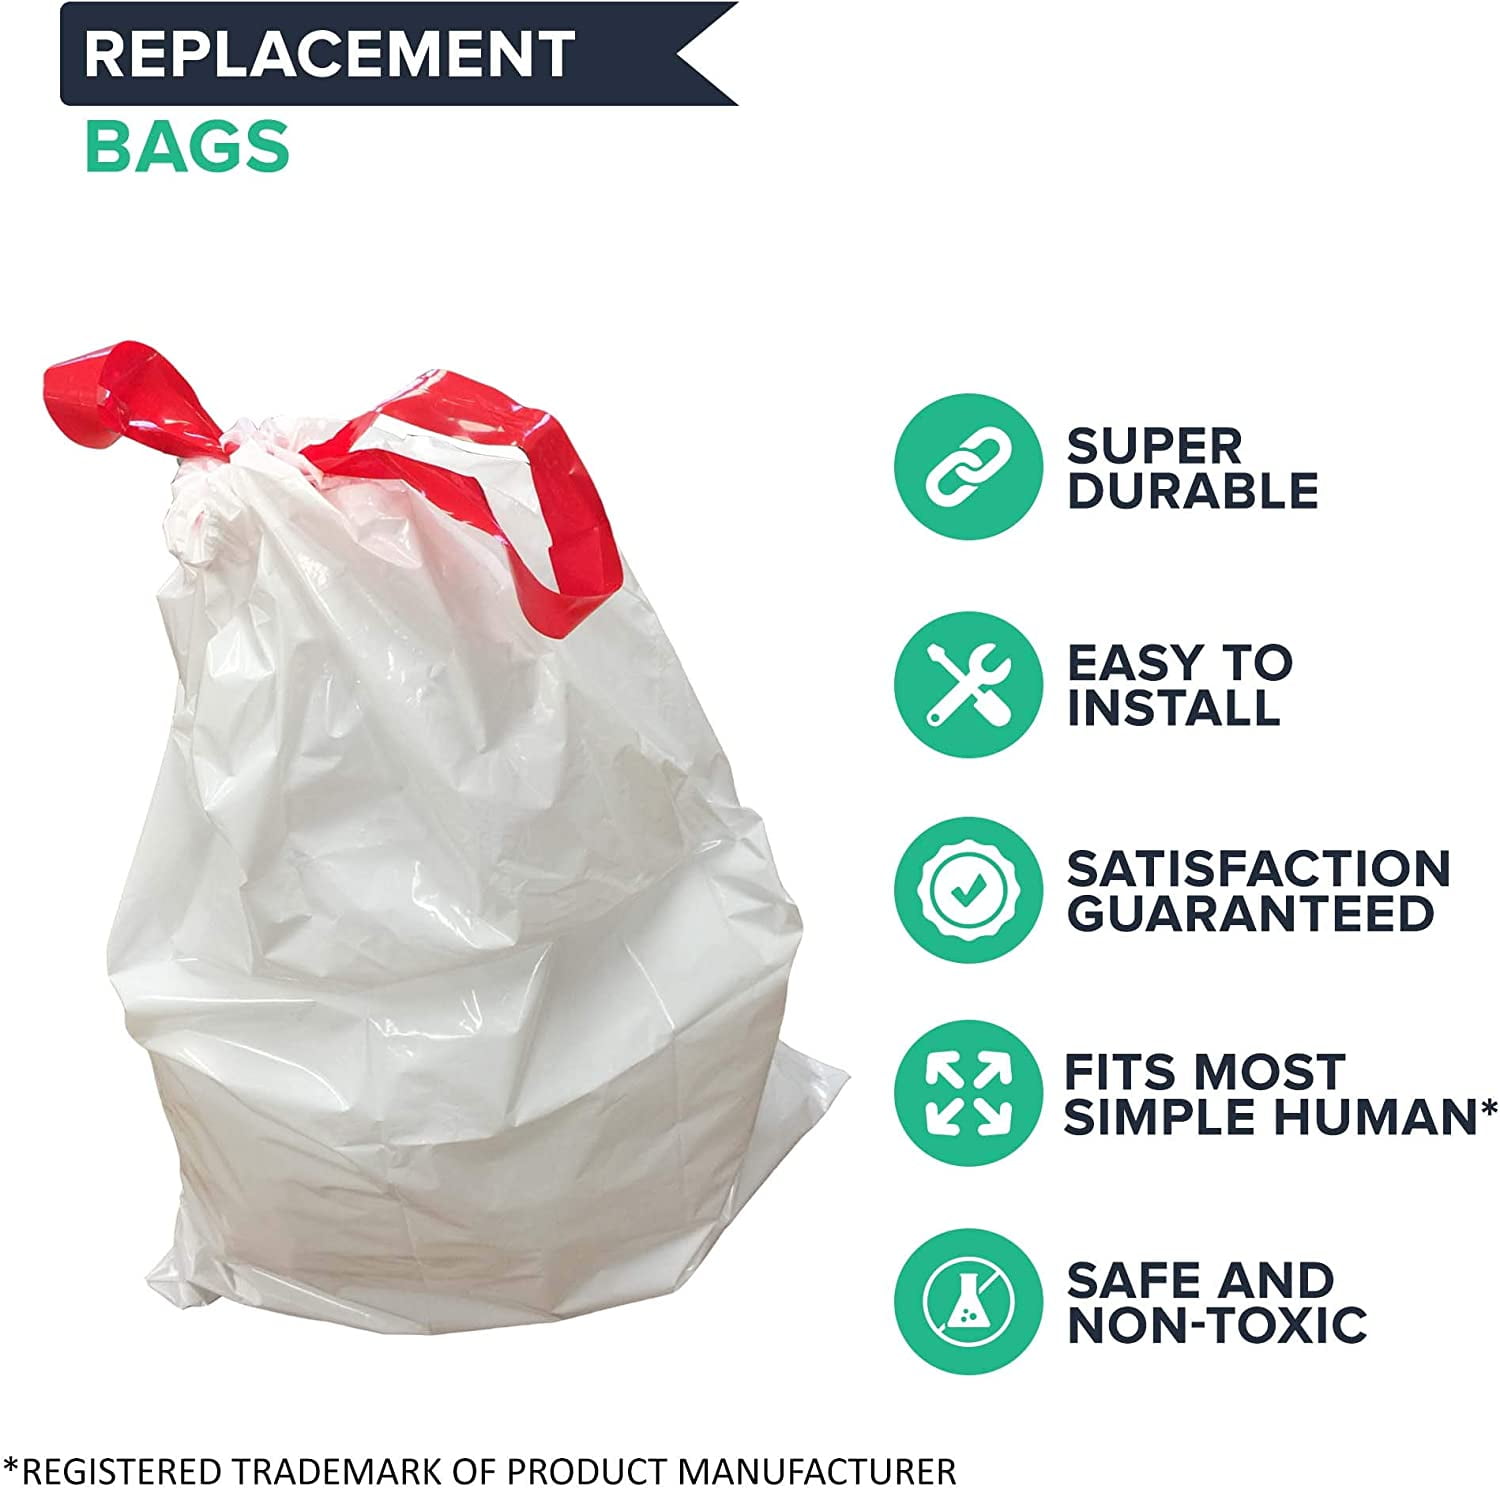 Think Crucial 100pk Replacement Durable Garbage Bags, Fits simplehuman Size B, 6L / 1.6 Gallon 43852050894